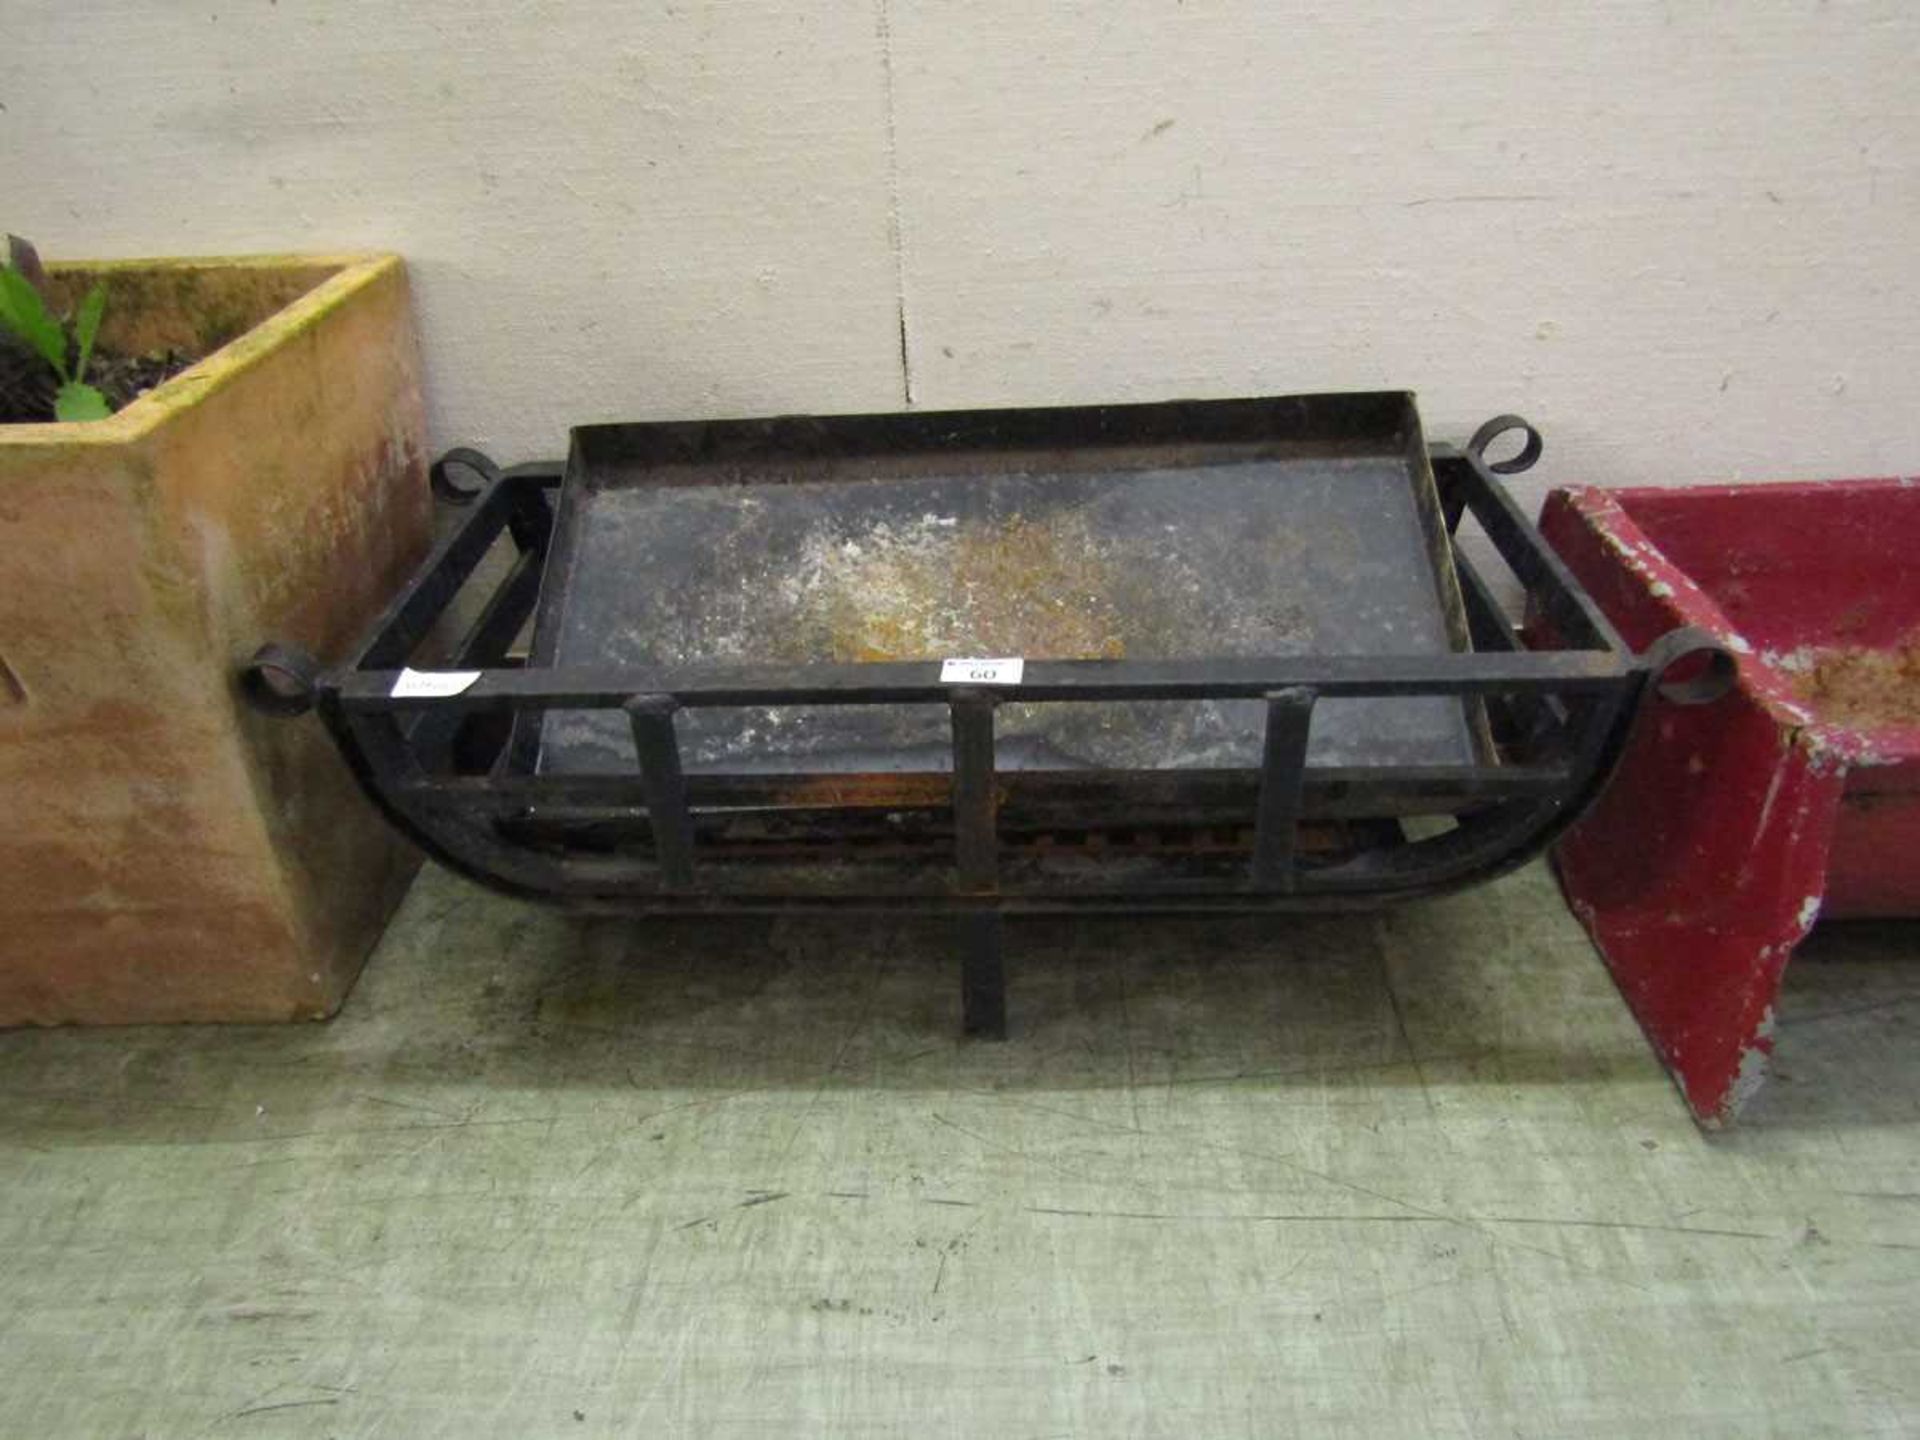 A black metal fire grate with ash tray